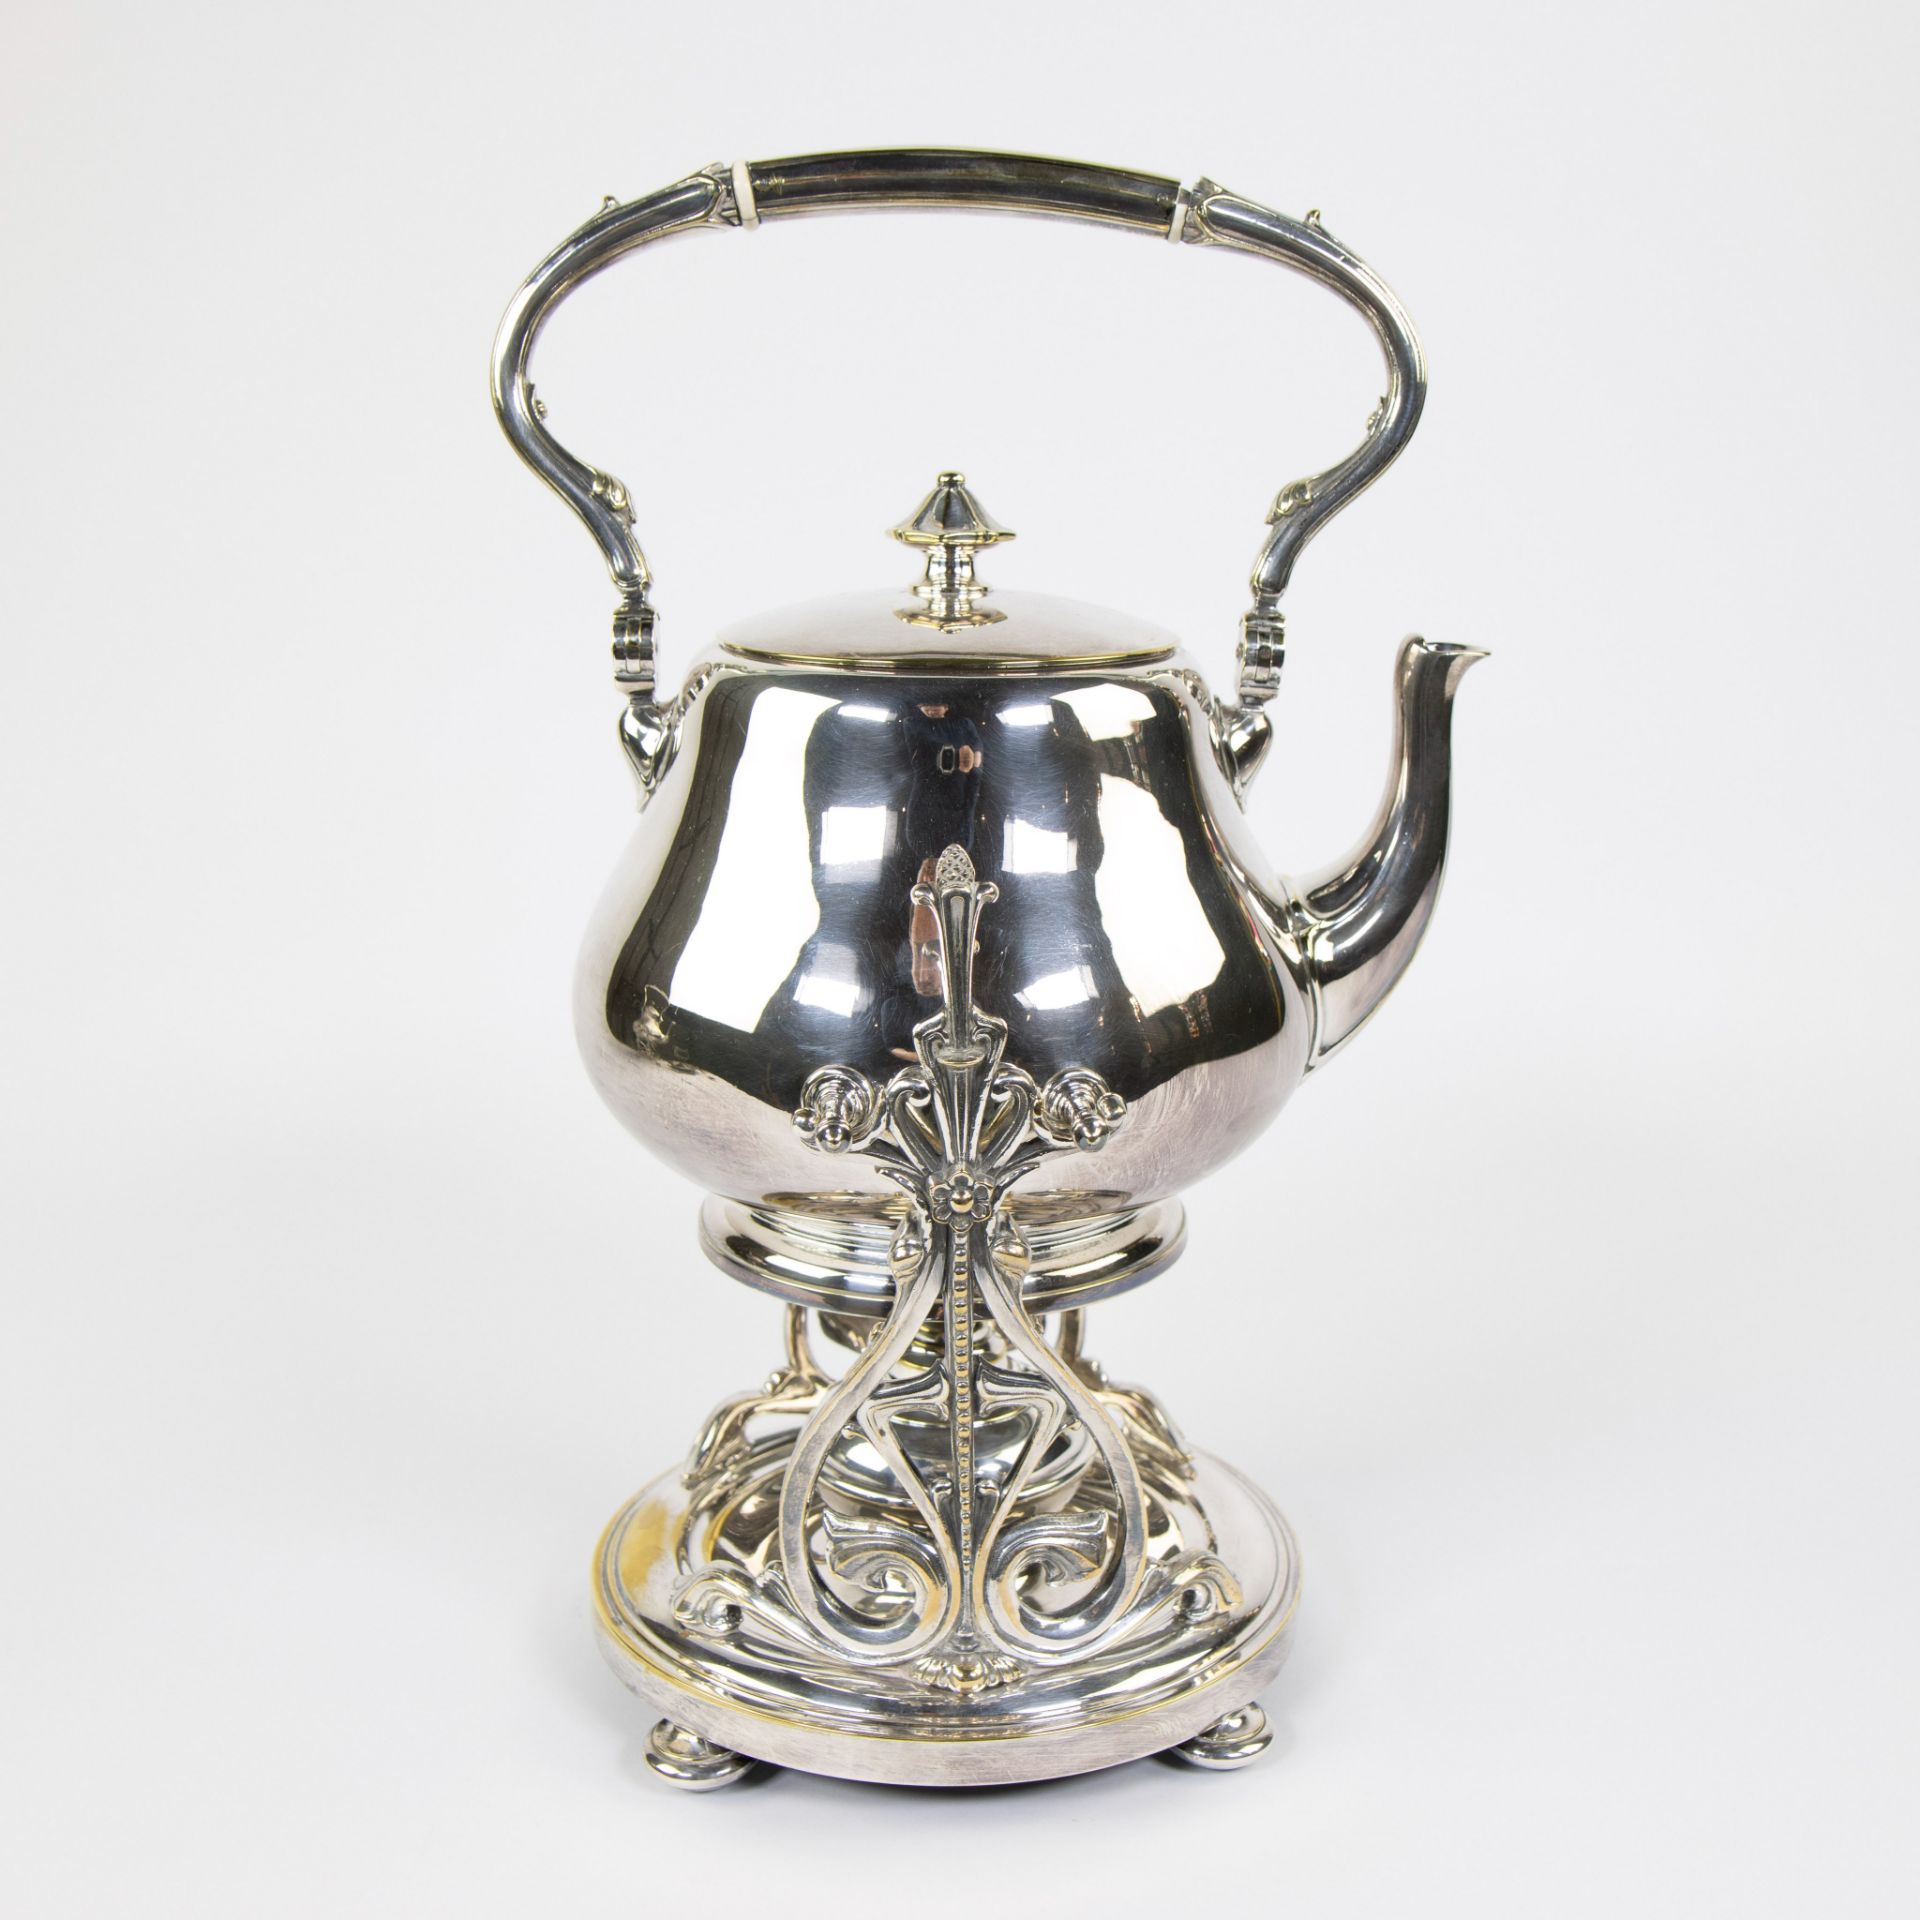 Christofle silver plated teapot on stove - Image 4 of 5